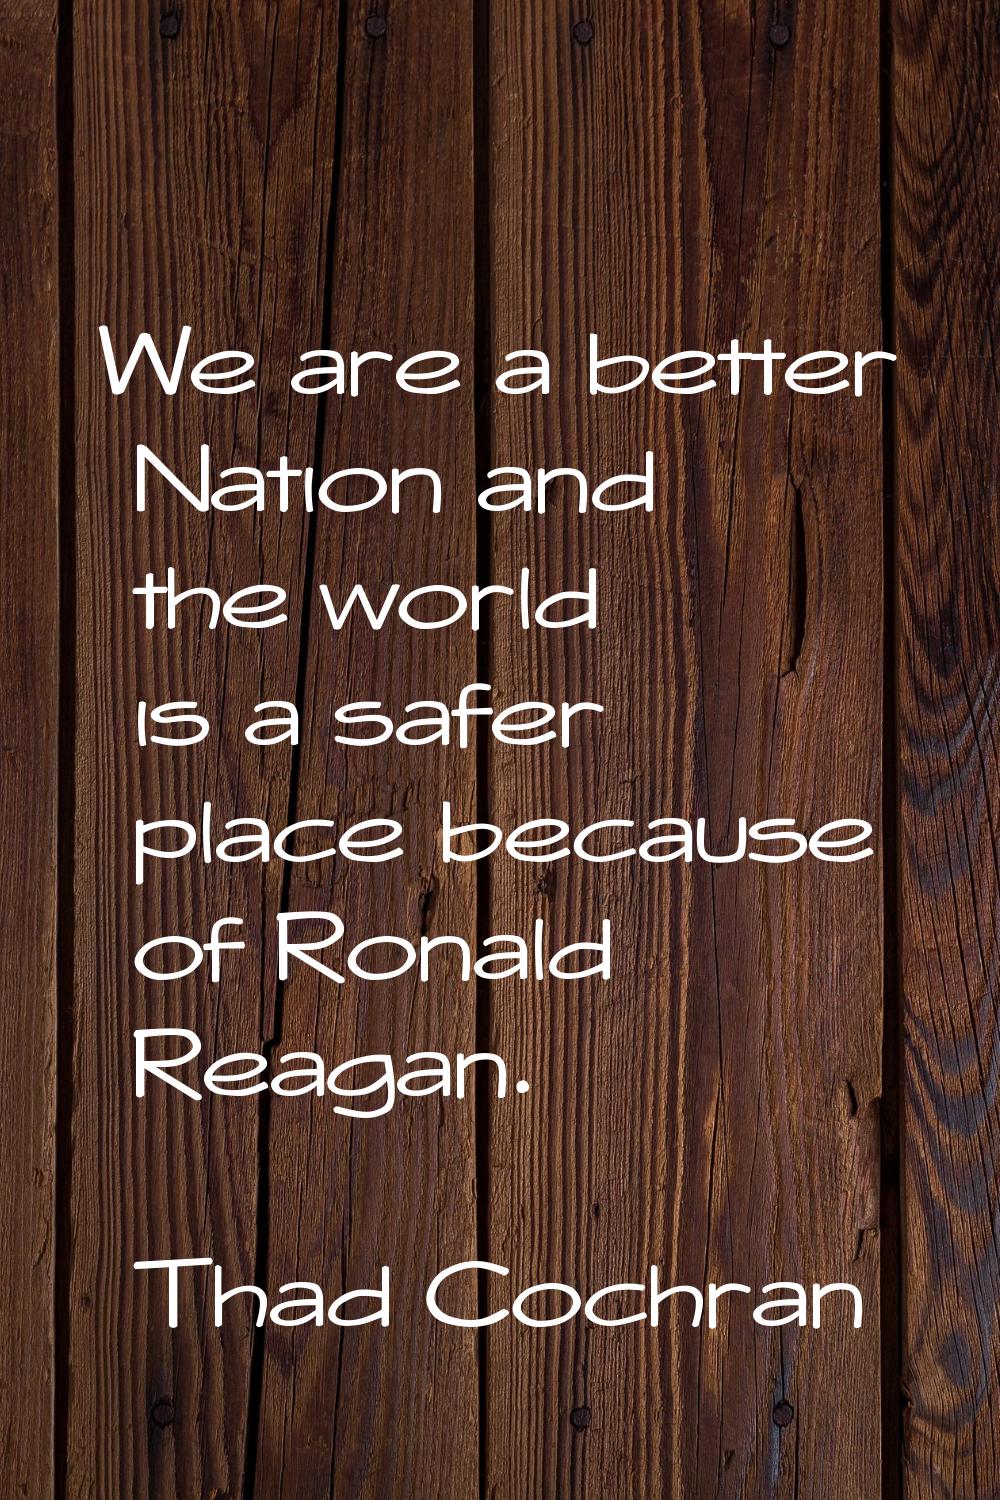 We are a better Nation and the world is a safer place because of Ronald Reagan.